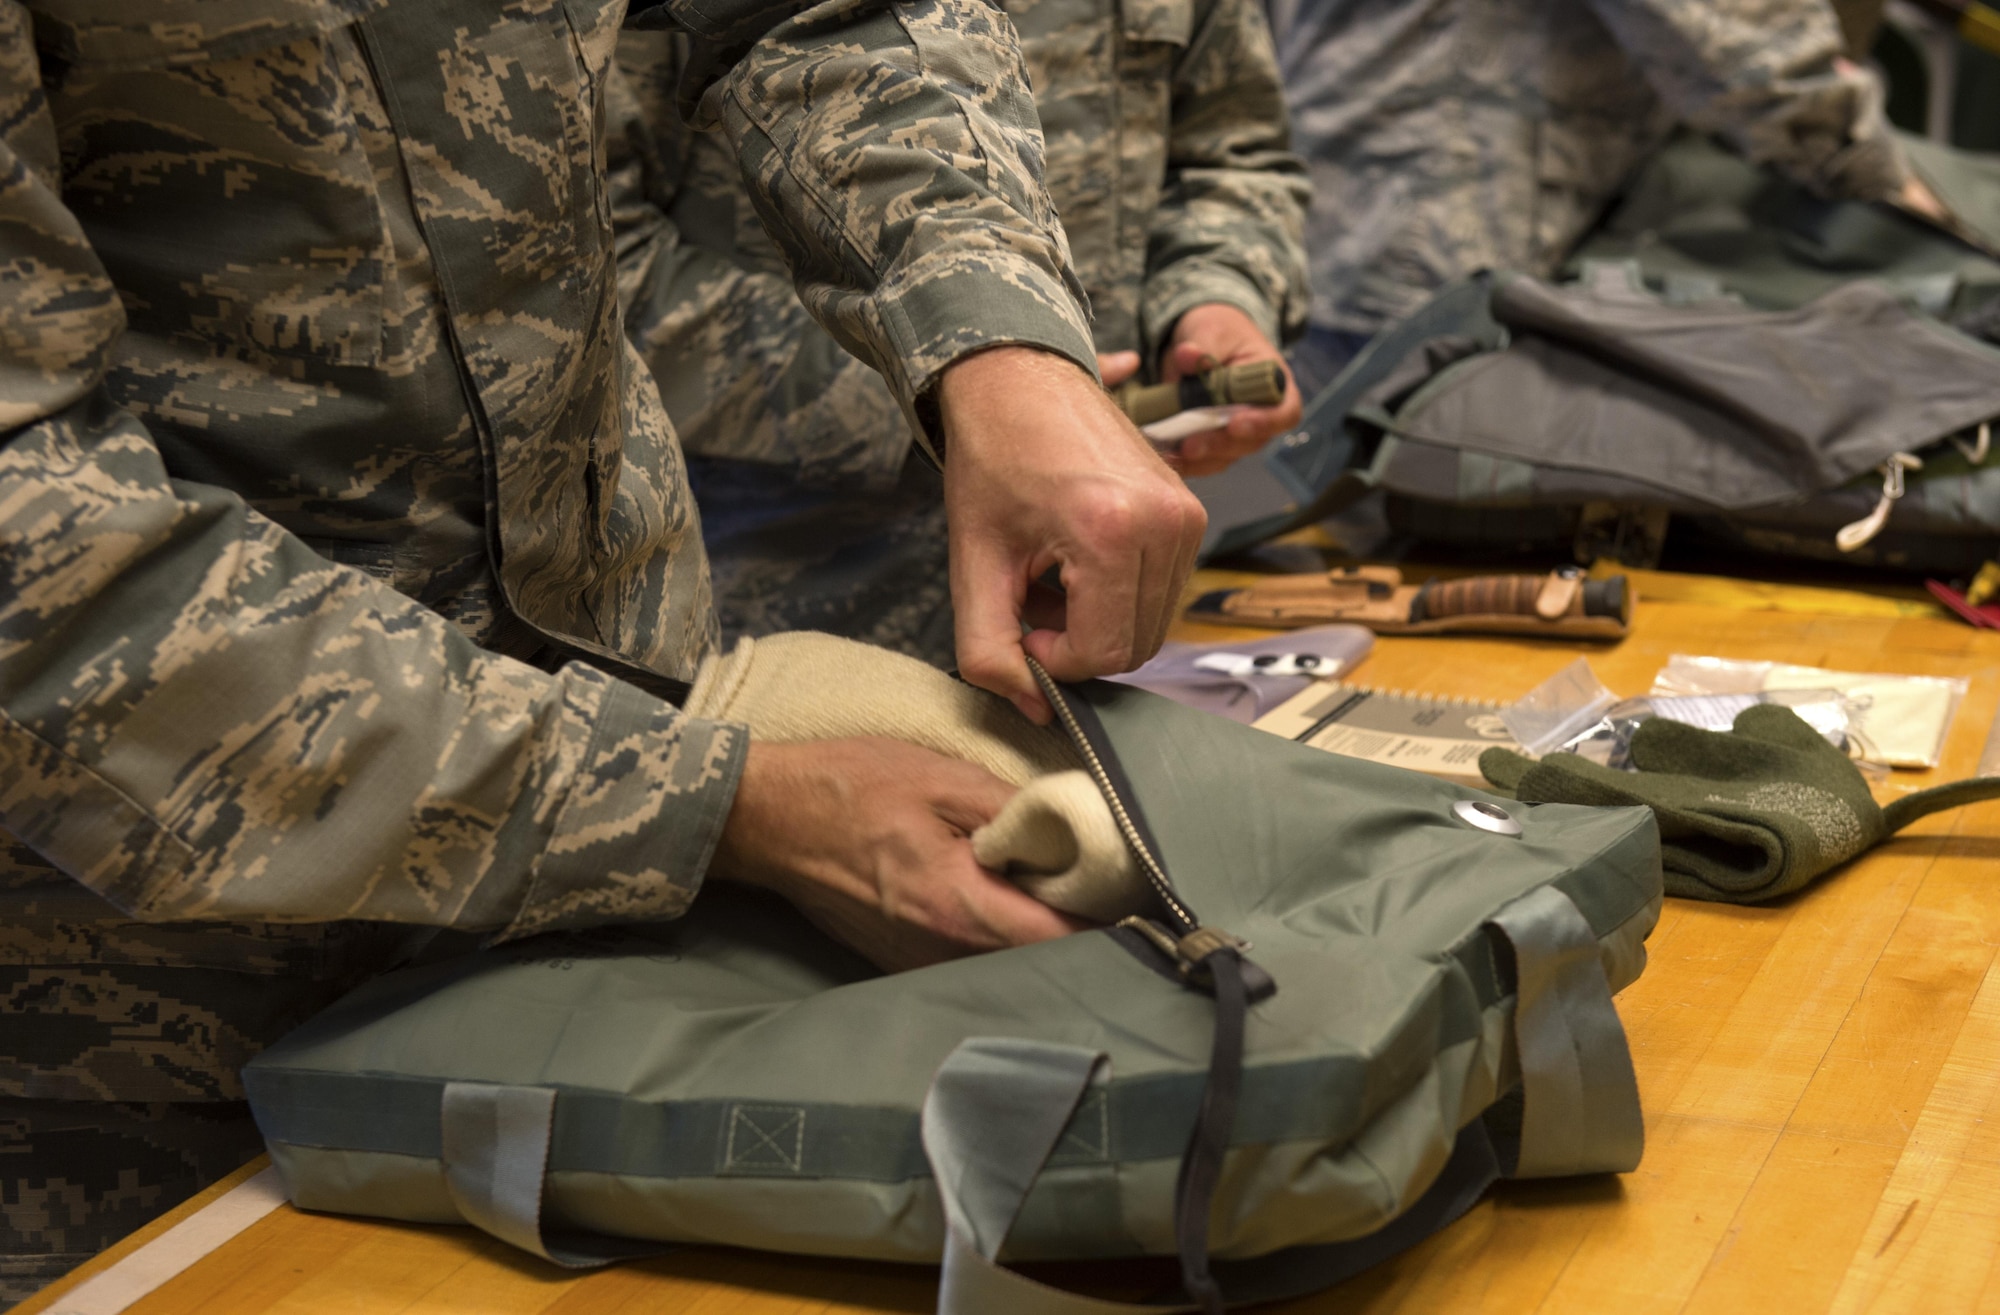 U.S. Air Force Chief Master Sgt. Edwin Ludwigsen, 52nd Fighter Wing command chief, learns how to pack an emergency survival bag during a Saber leadership “out and about” event at the parachute shop on Spangdahlem Air Base, Germany, Sept. 8, 2016. The event lets the 52nd FW commander and command chief get a hands on experience at Saber work centers in an effort to better understand the duties of Airmen at Spangdahlem. (U.S. Air Force photo by Airman 1st Class Preston Cherry/Released)